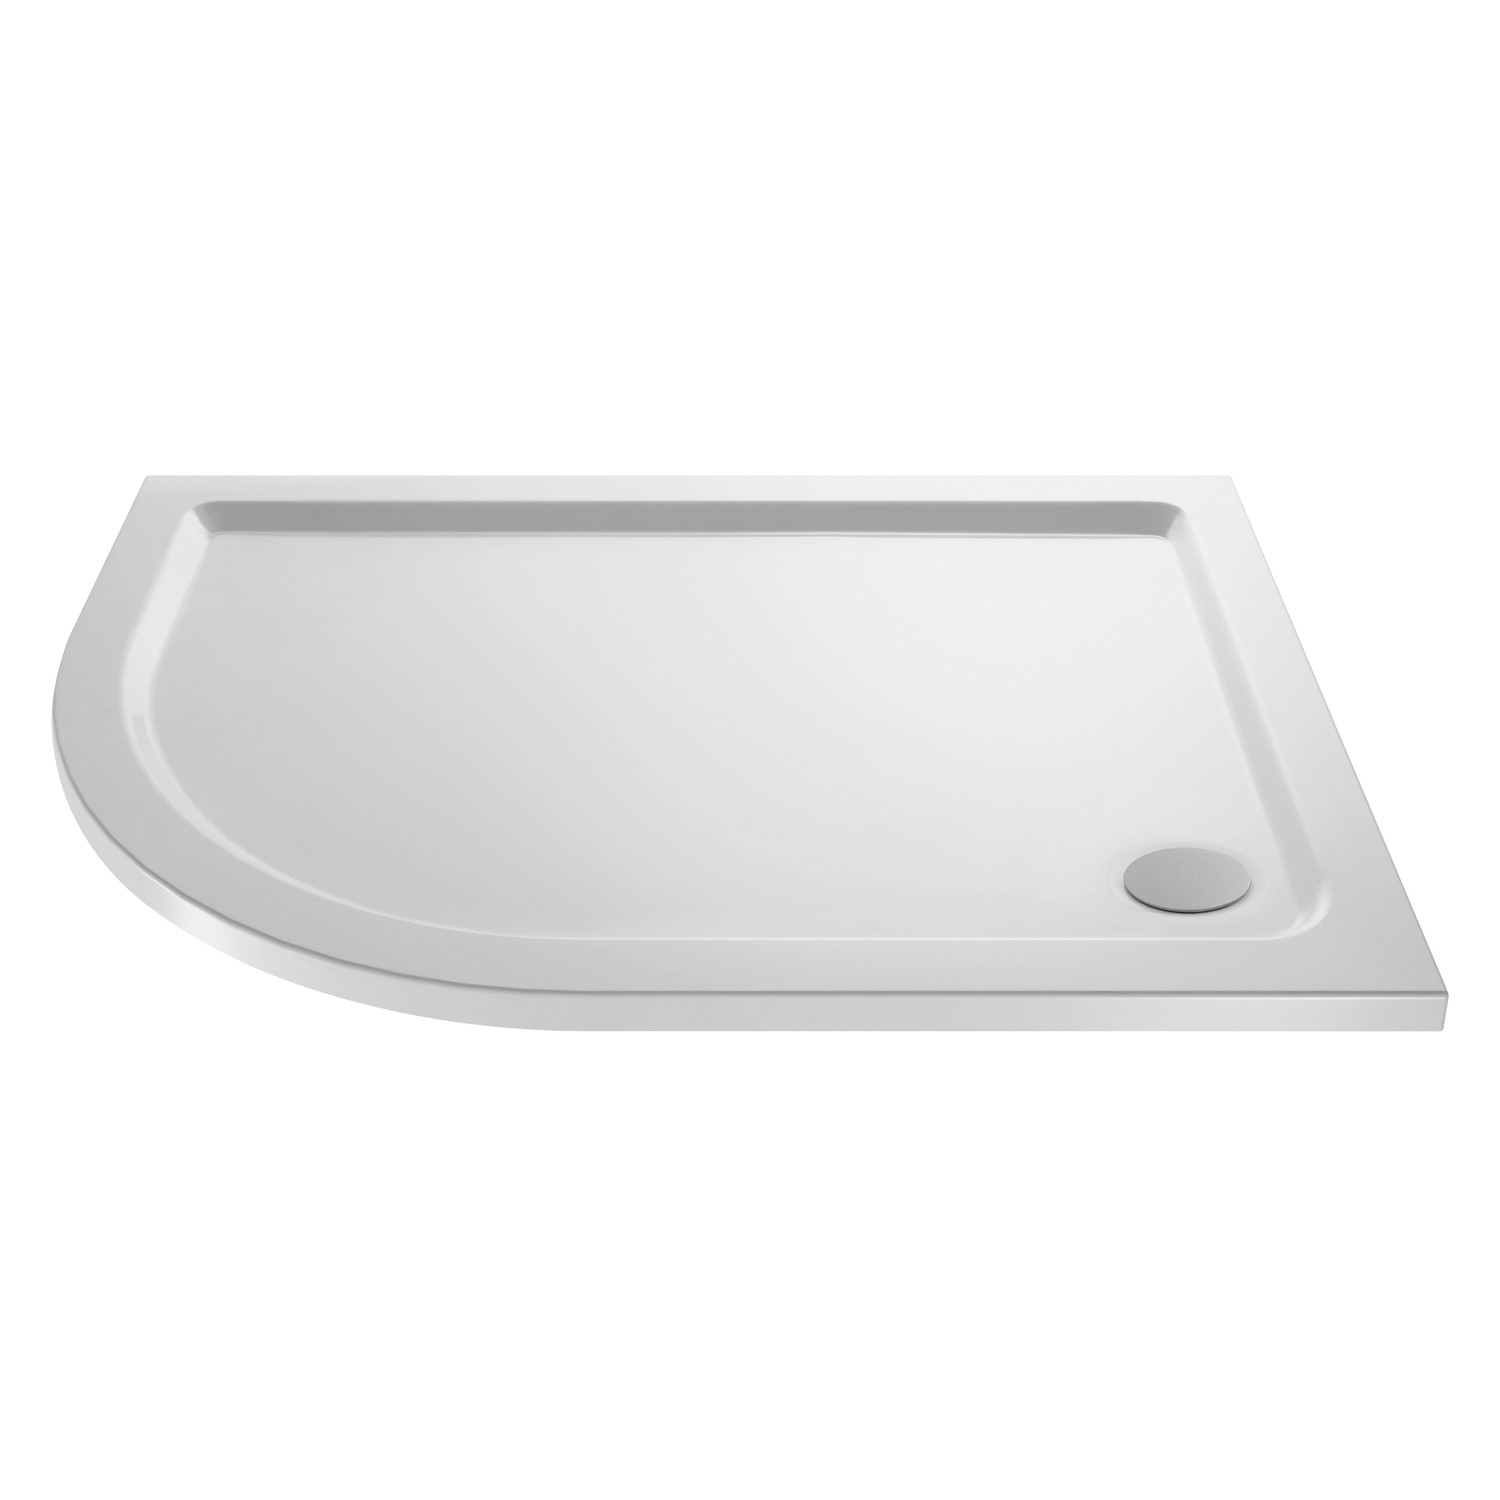 Low Profile Left Hand Offset Quadrant Shower Tray 900 x 760mm - Purity